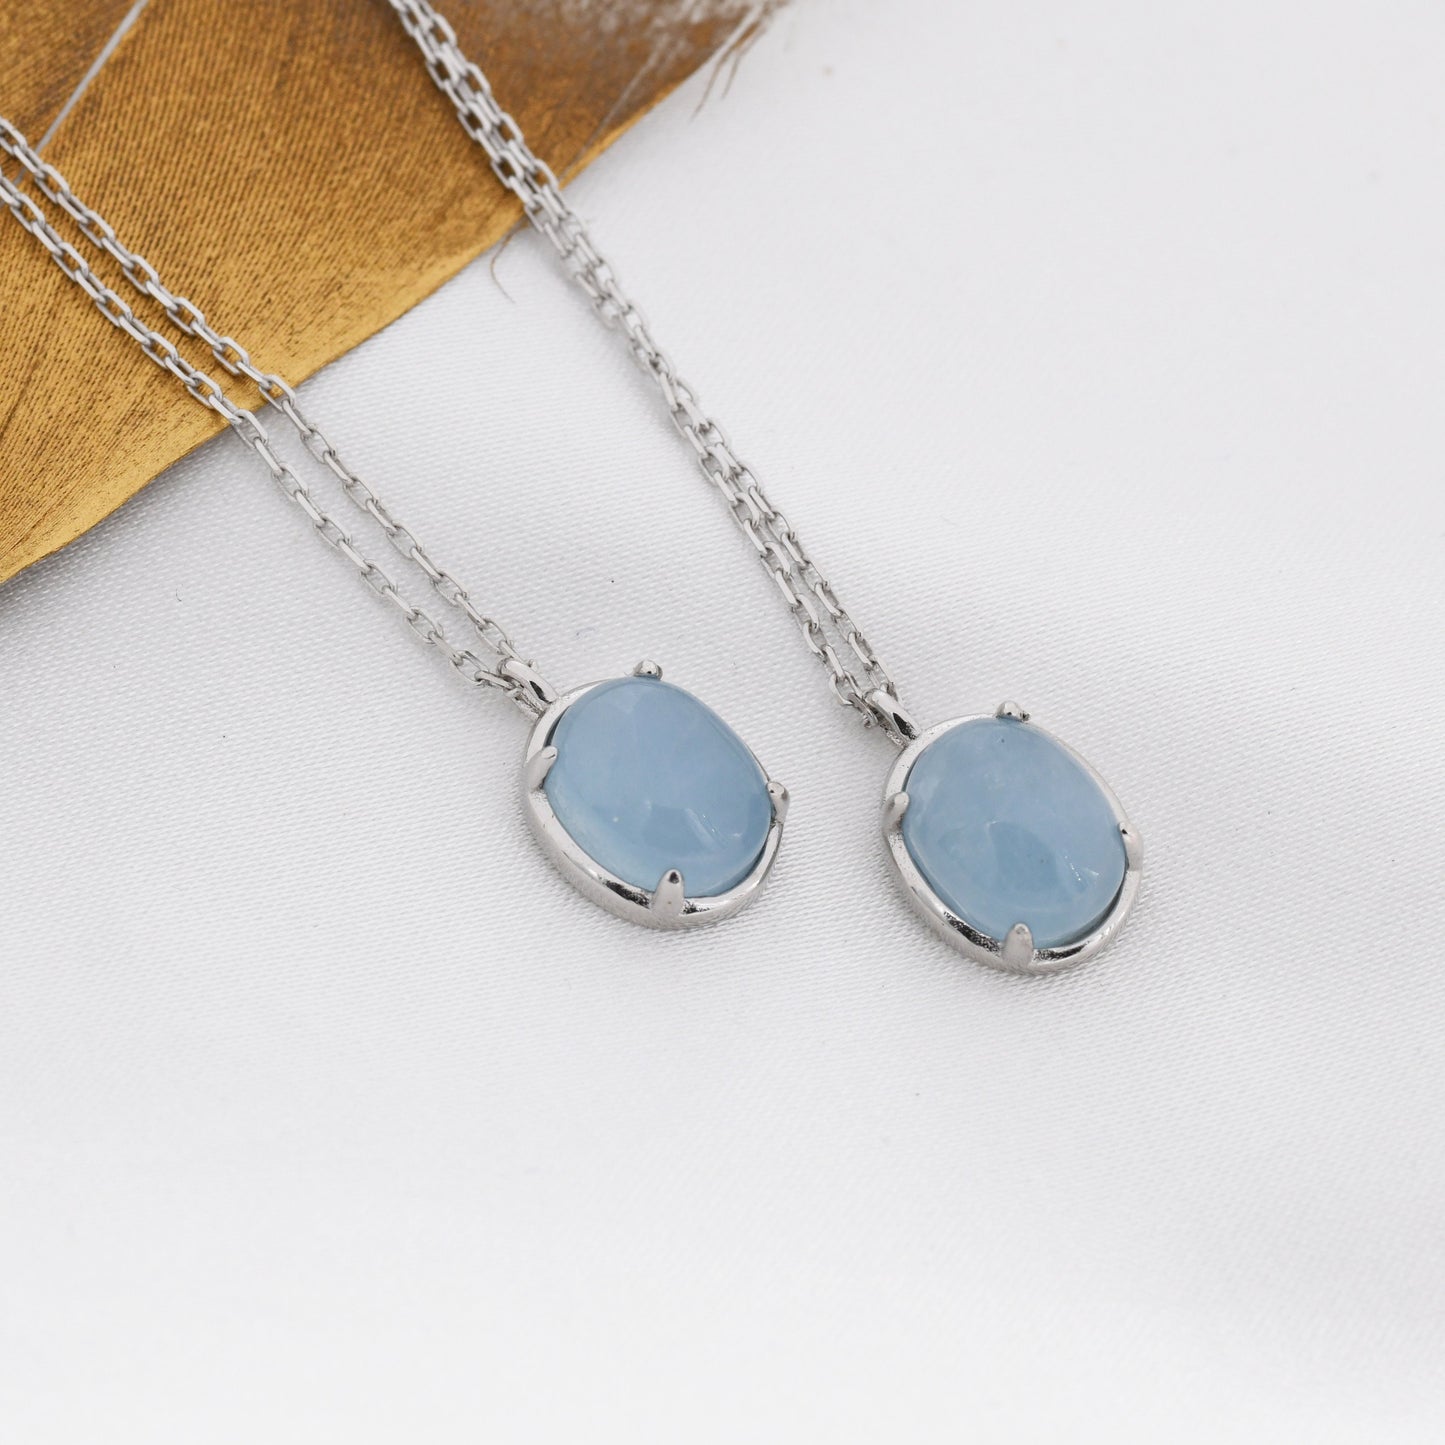 Genuine Aquamarine Crystal Oval Necklace in Sterling Silver, Oval Cabochon Natural Aquamarine Necklace, March Birthstone